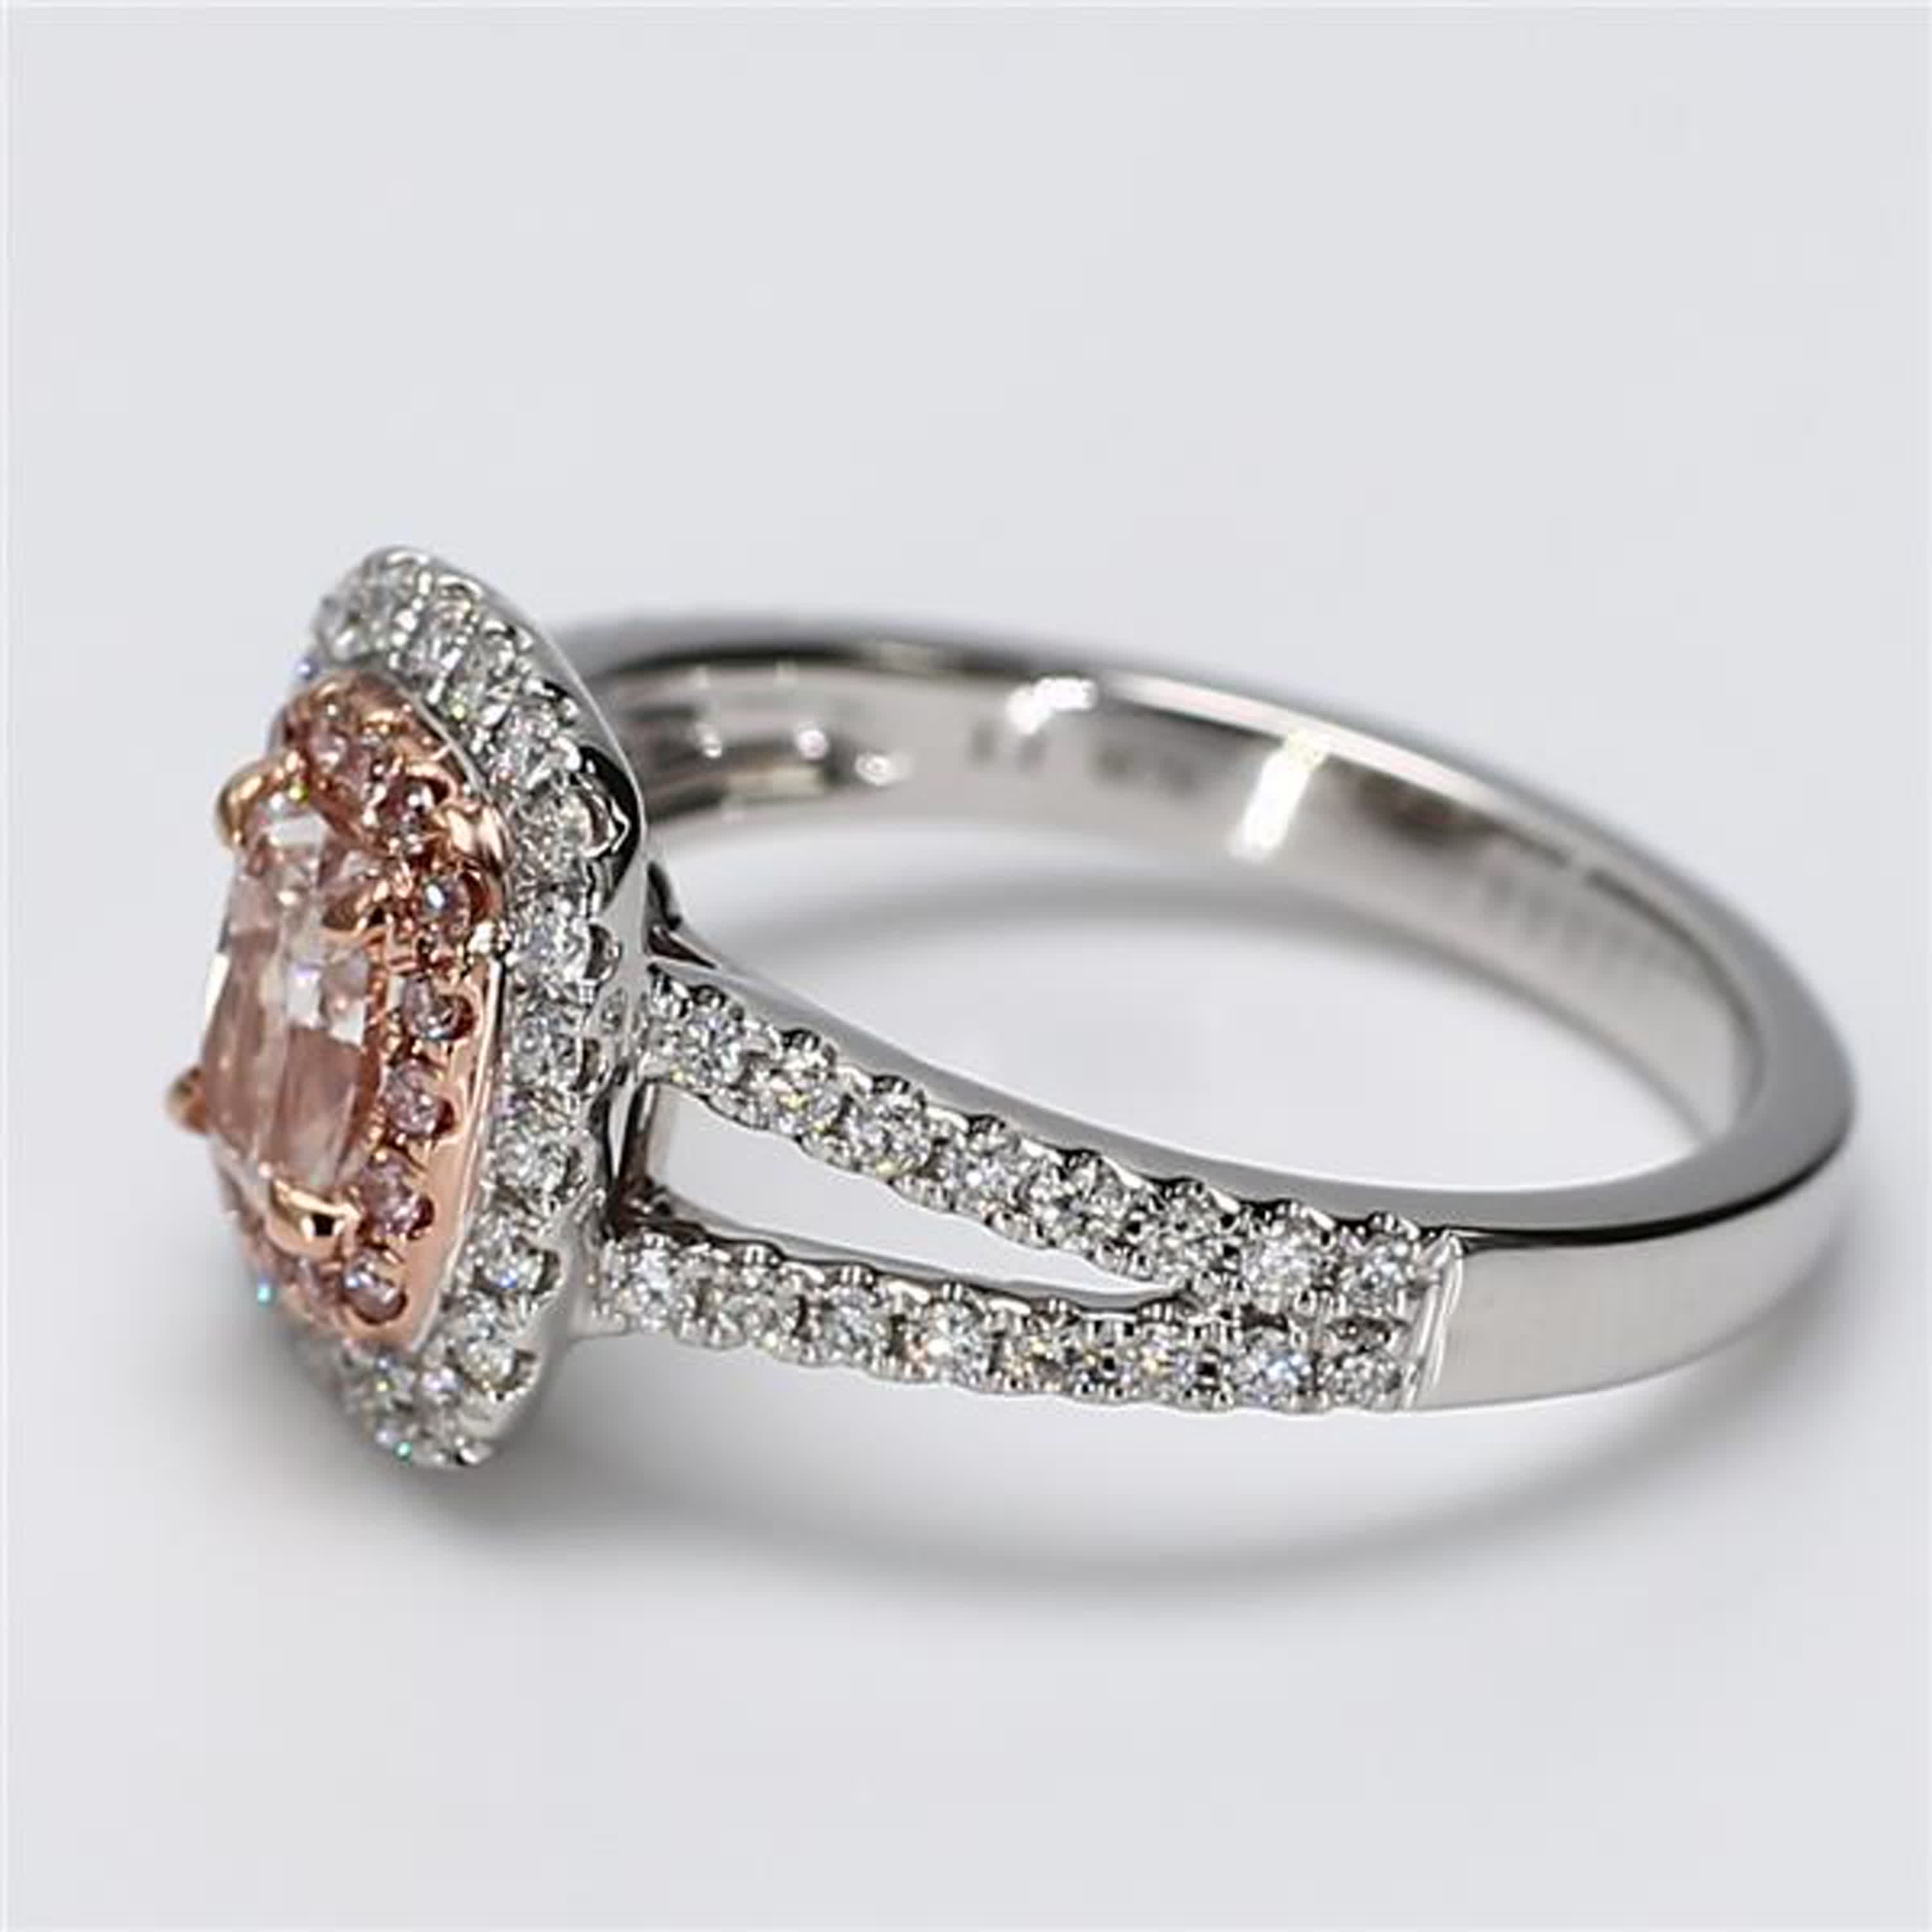 GIA Certified Natural Pink Cushion and White Diamond 1.17 Carat TW Gold Ring